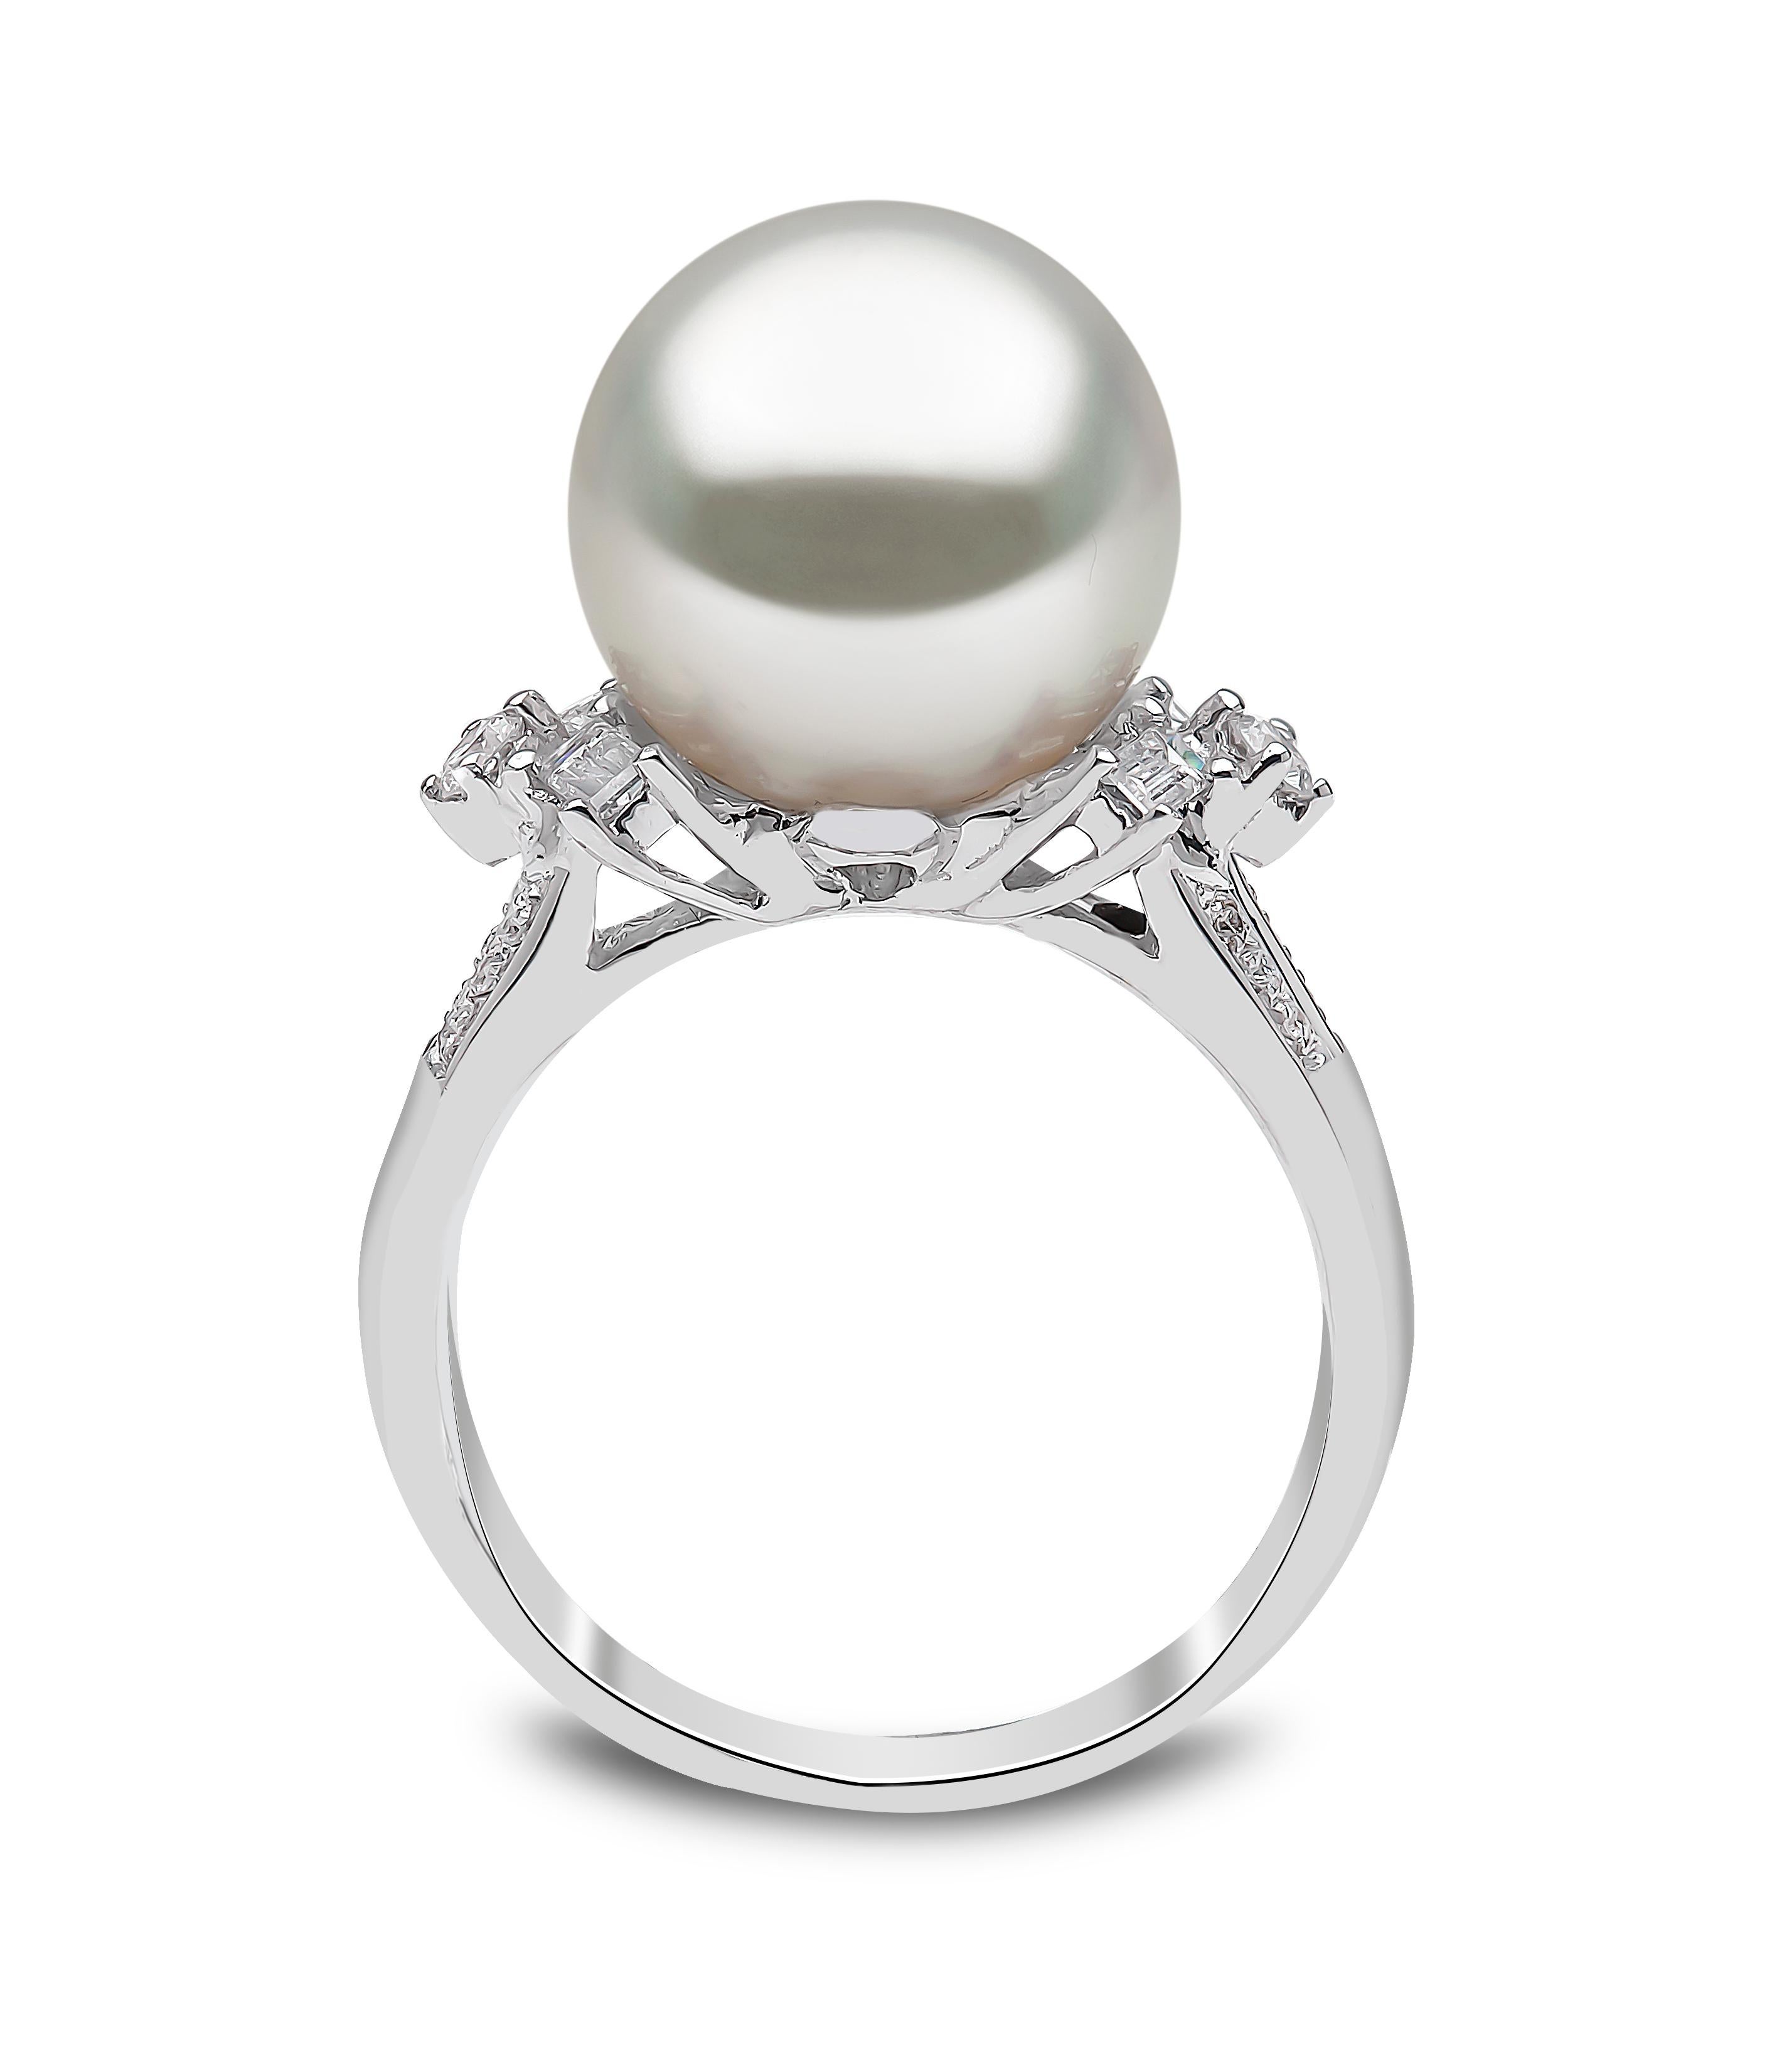 This elegant ring by Yoko London feature a lustrous South Sea pearl which has been hand-selected in our London atelier for its superb lustre, colour and surface area. The South Sea pearl sits atop a delicate arrangement of Baguette and Round